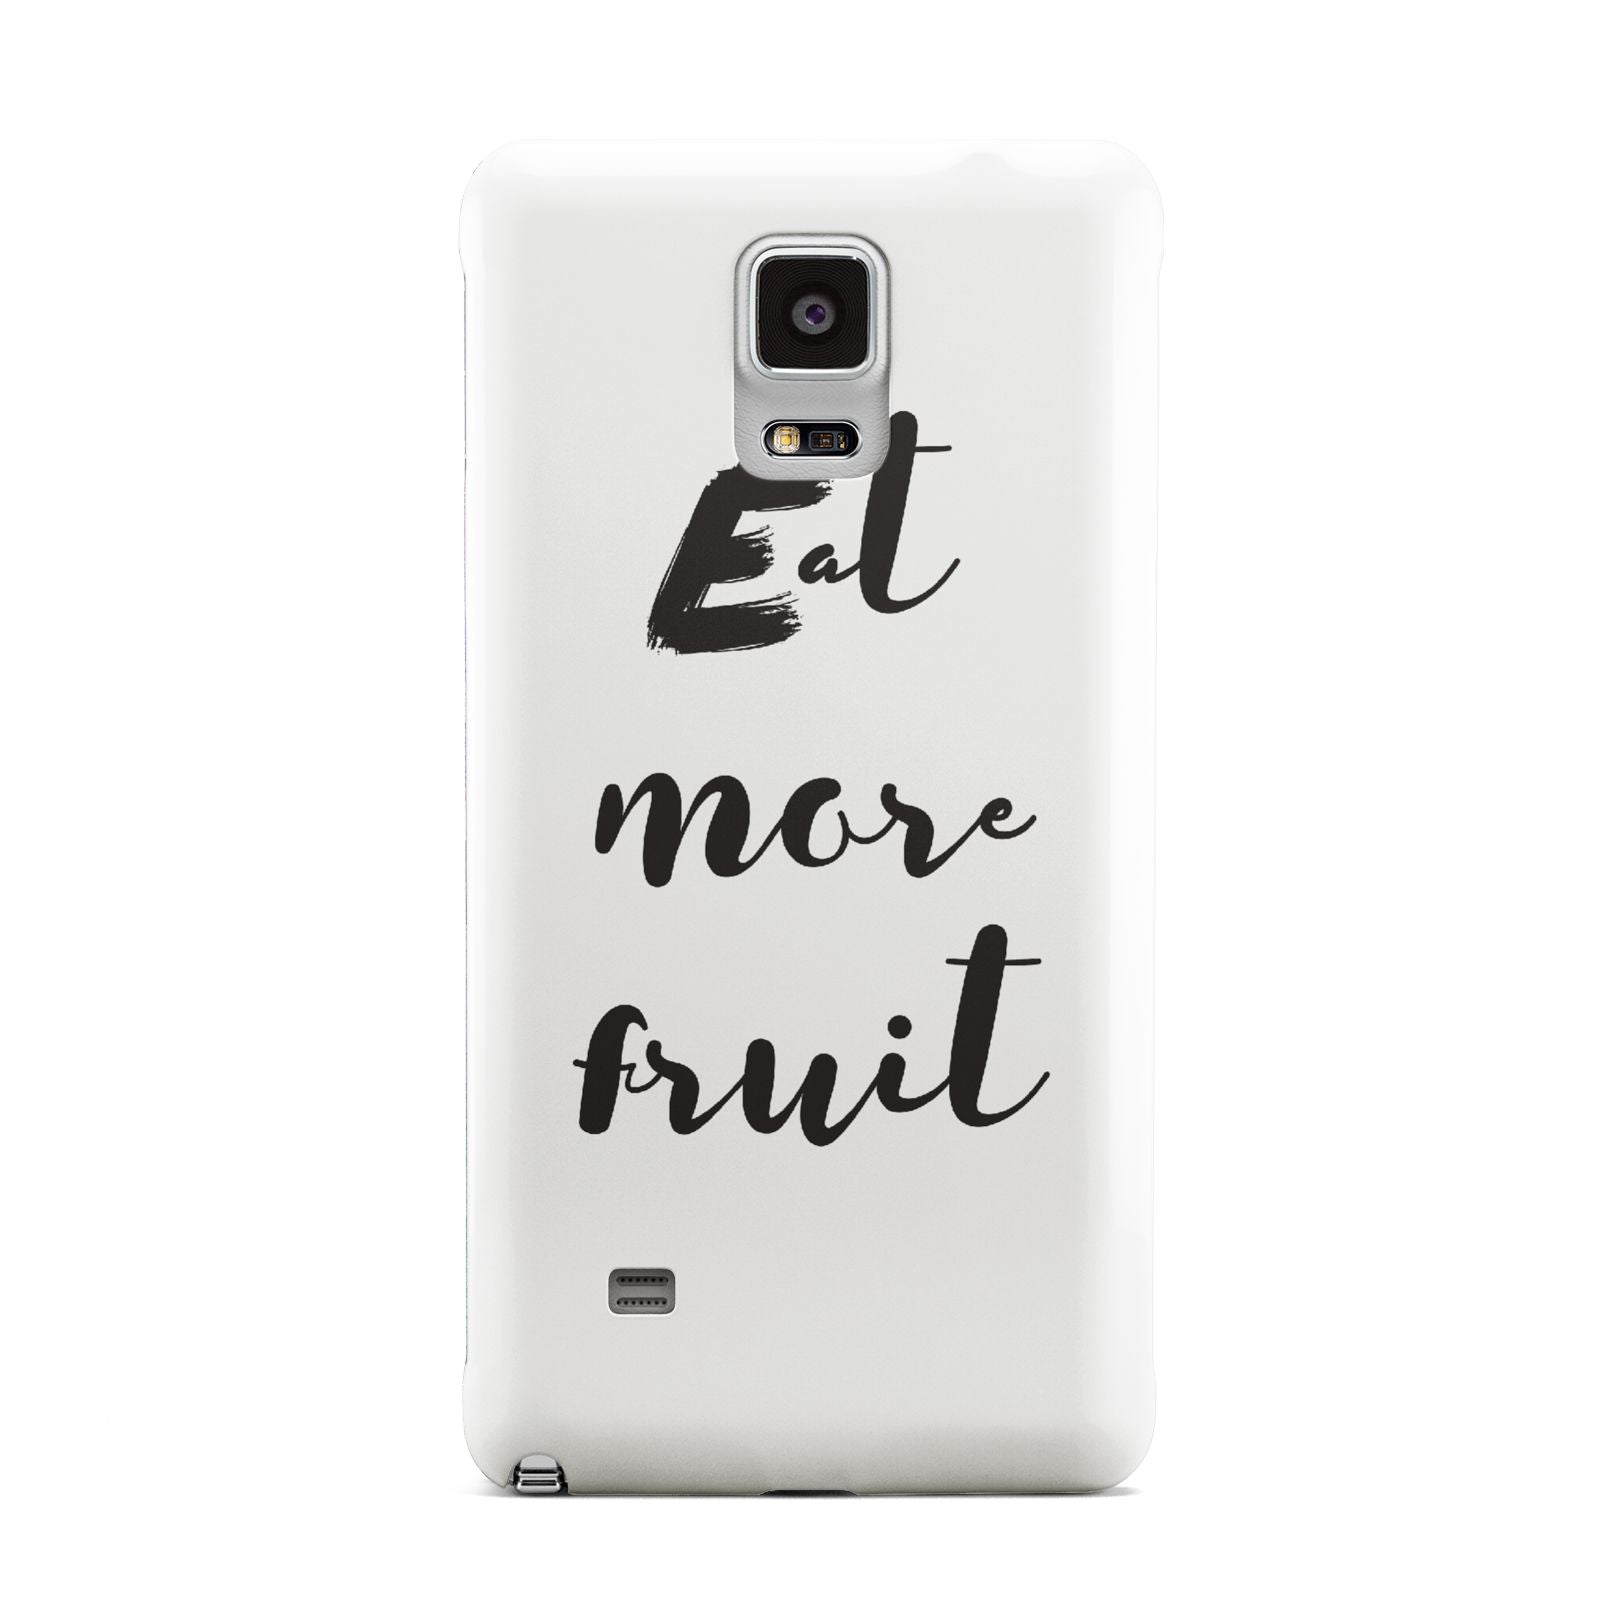 Eat More Fruit Samsung Galaxy Note 4 Case